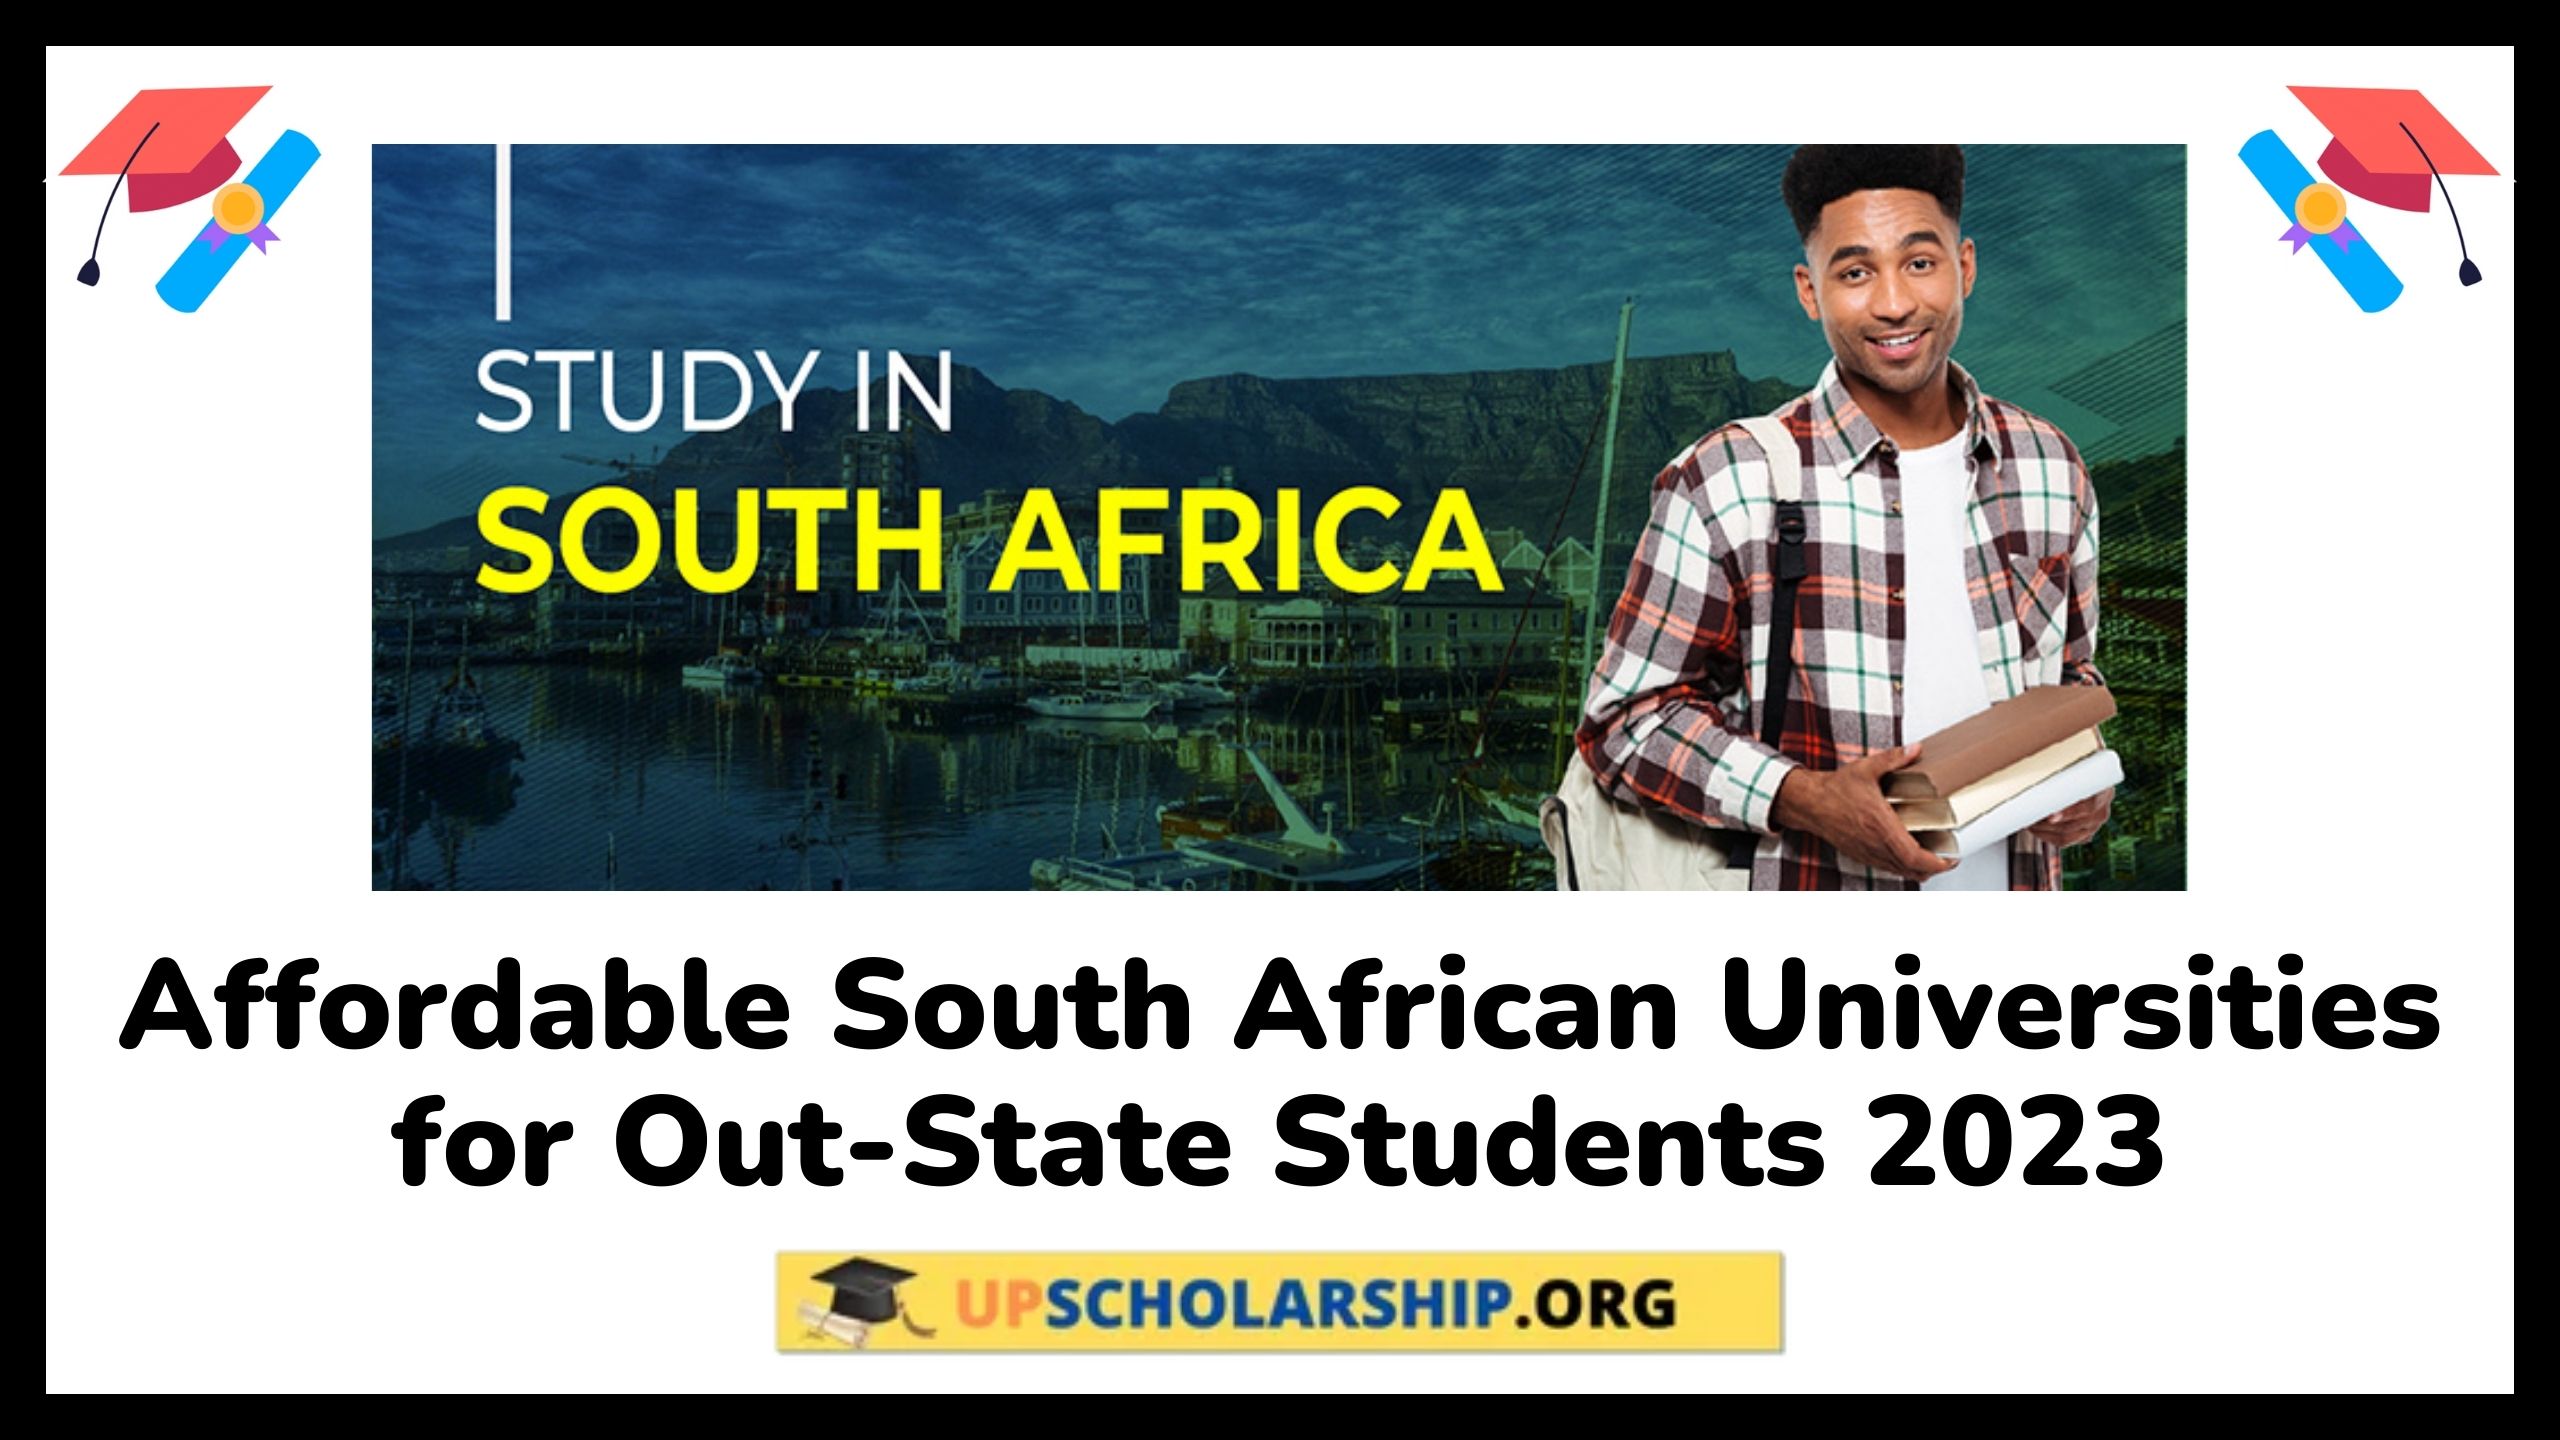 Affordable South African Universities for Out-State Students 2023